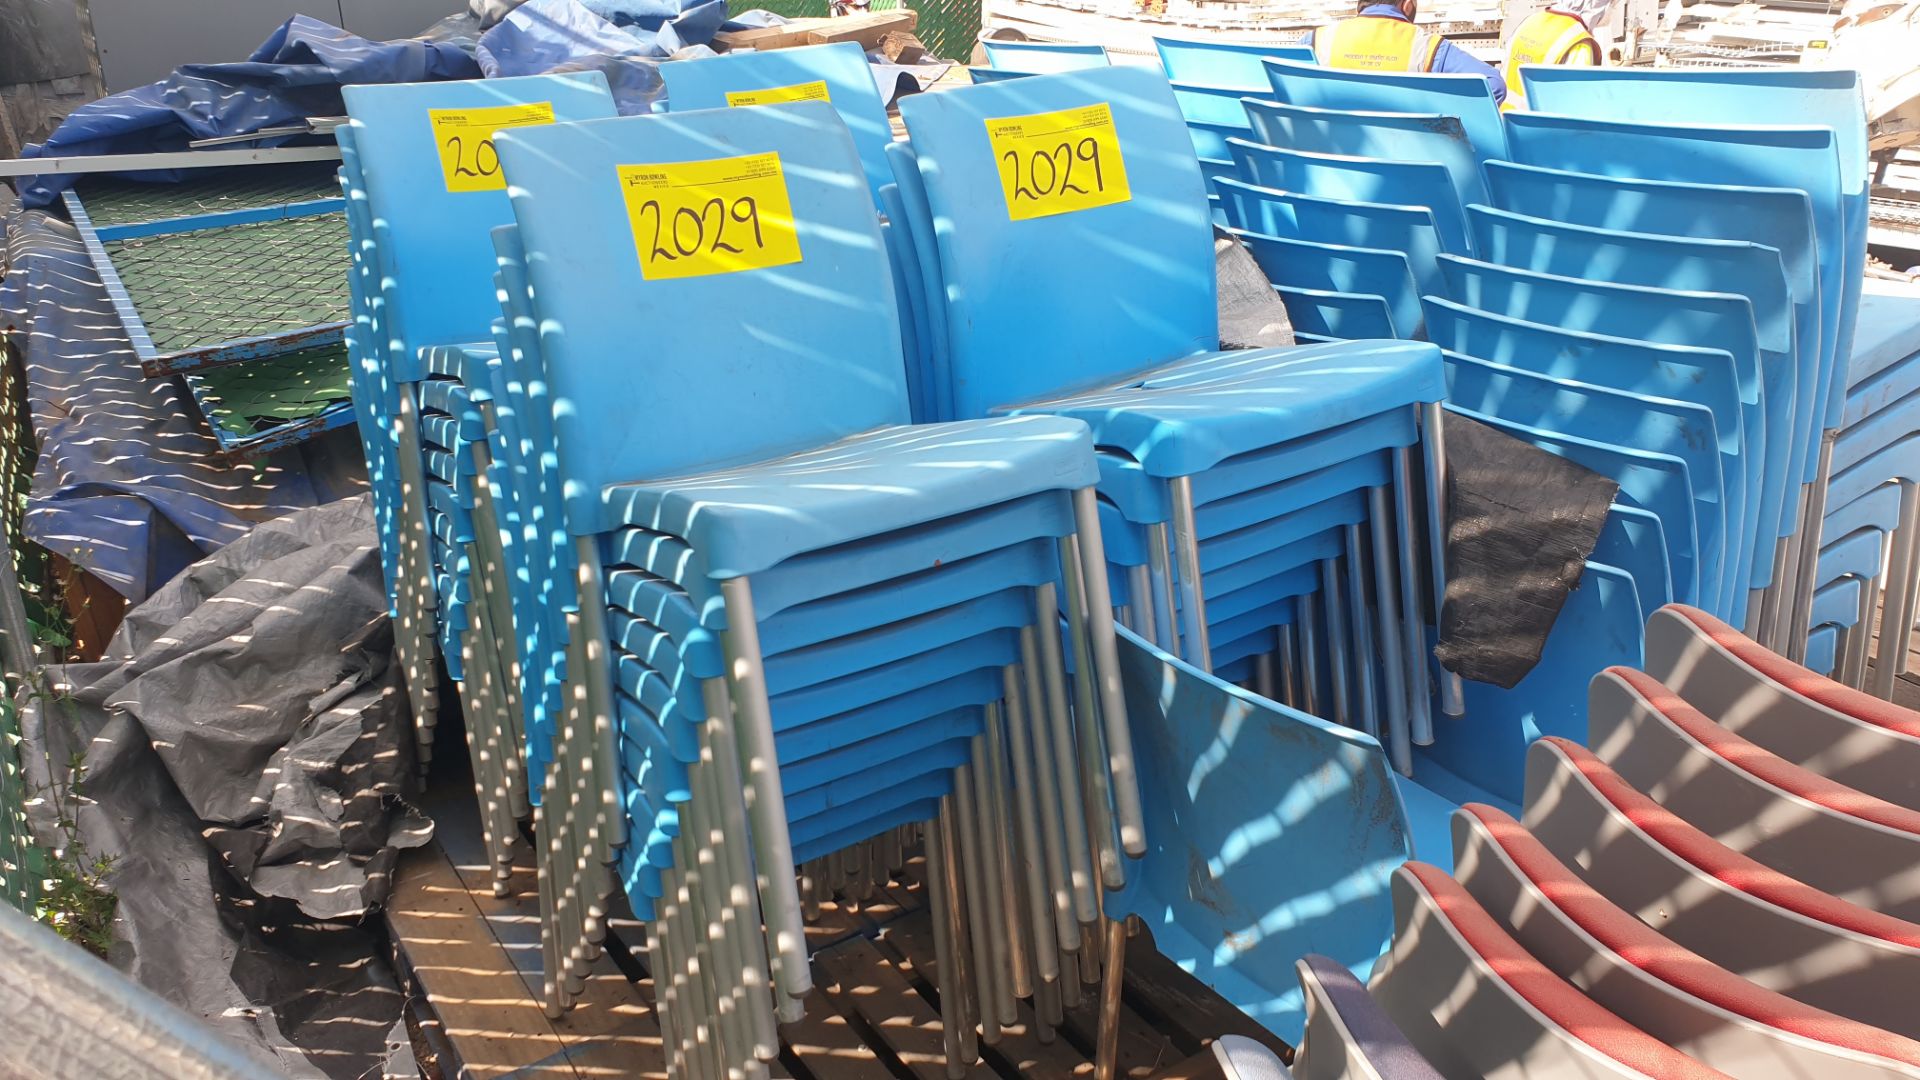 1 Lote of 40 blue plastic chairs, 7 metal chairs for office with backrest and upholstered seat - Bild 19 aus 22